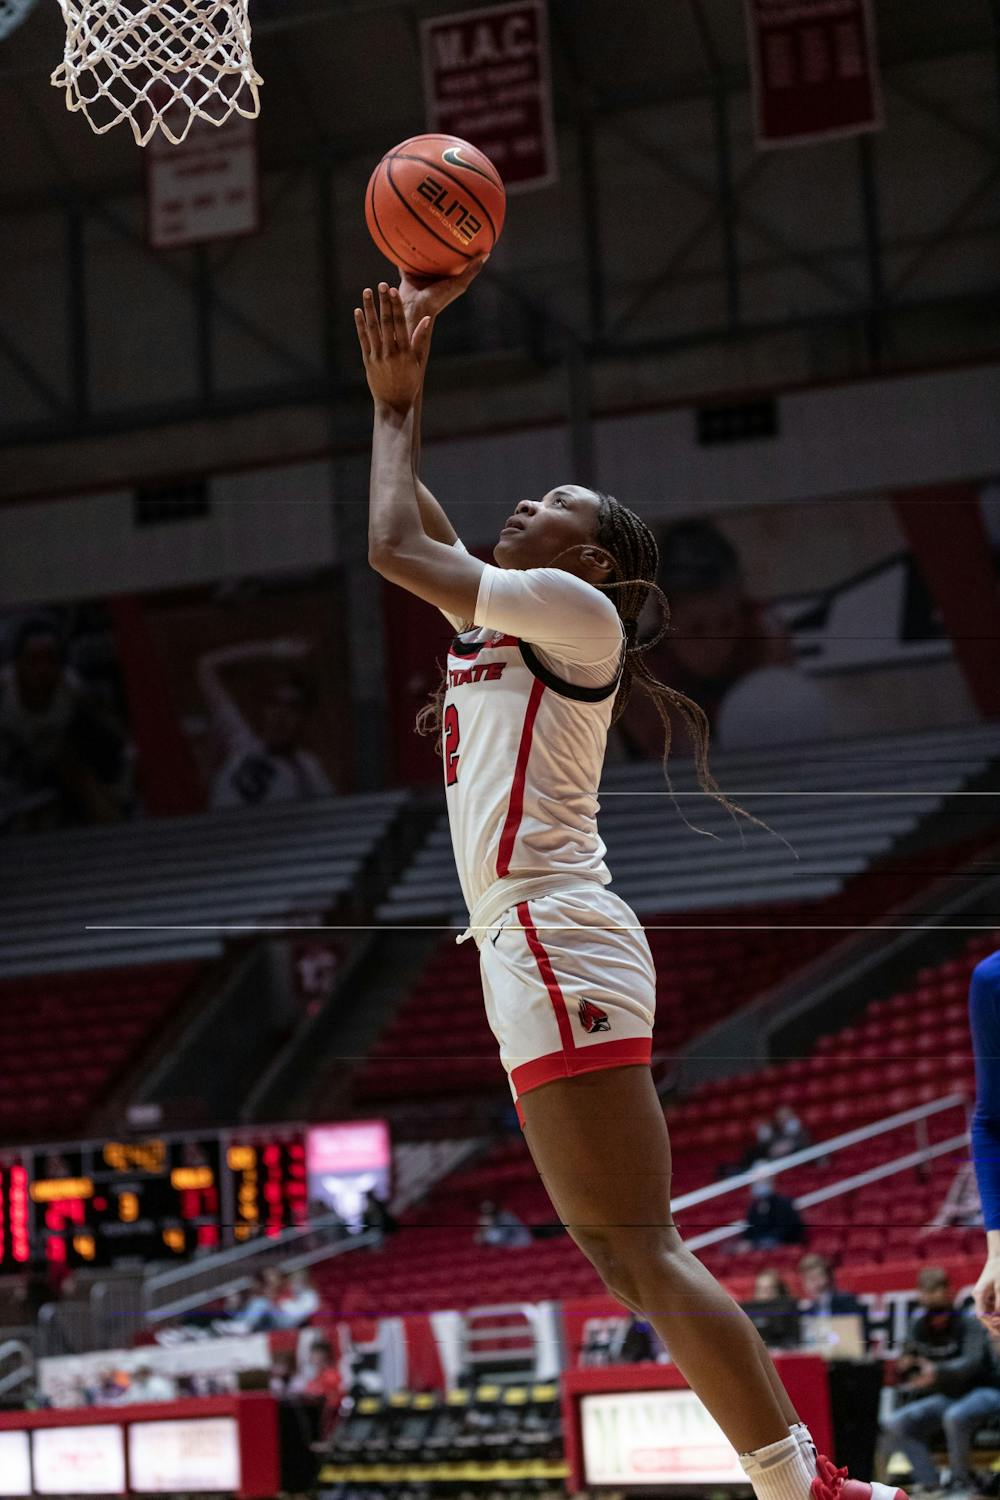 Graduate Student Chyna Latimer (2) drives toward the basket for a layup Feb. 16 at Worthen Arena. Latimer led the Cardinals going into the half with 8 points, 3 rebounds and 1 assist. Eli Houser, DN